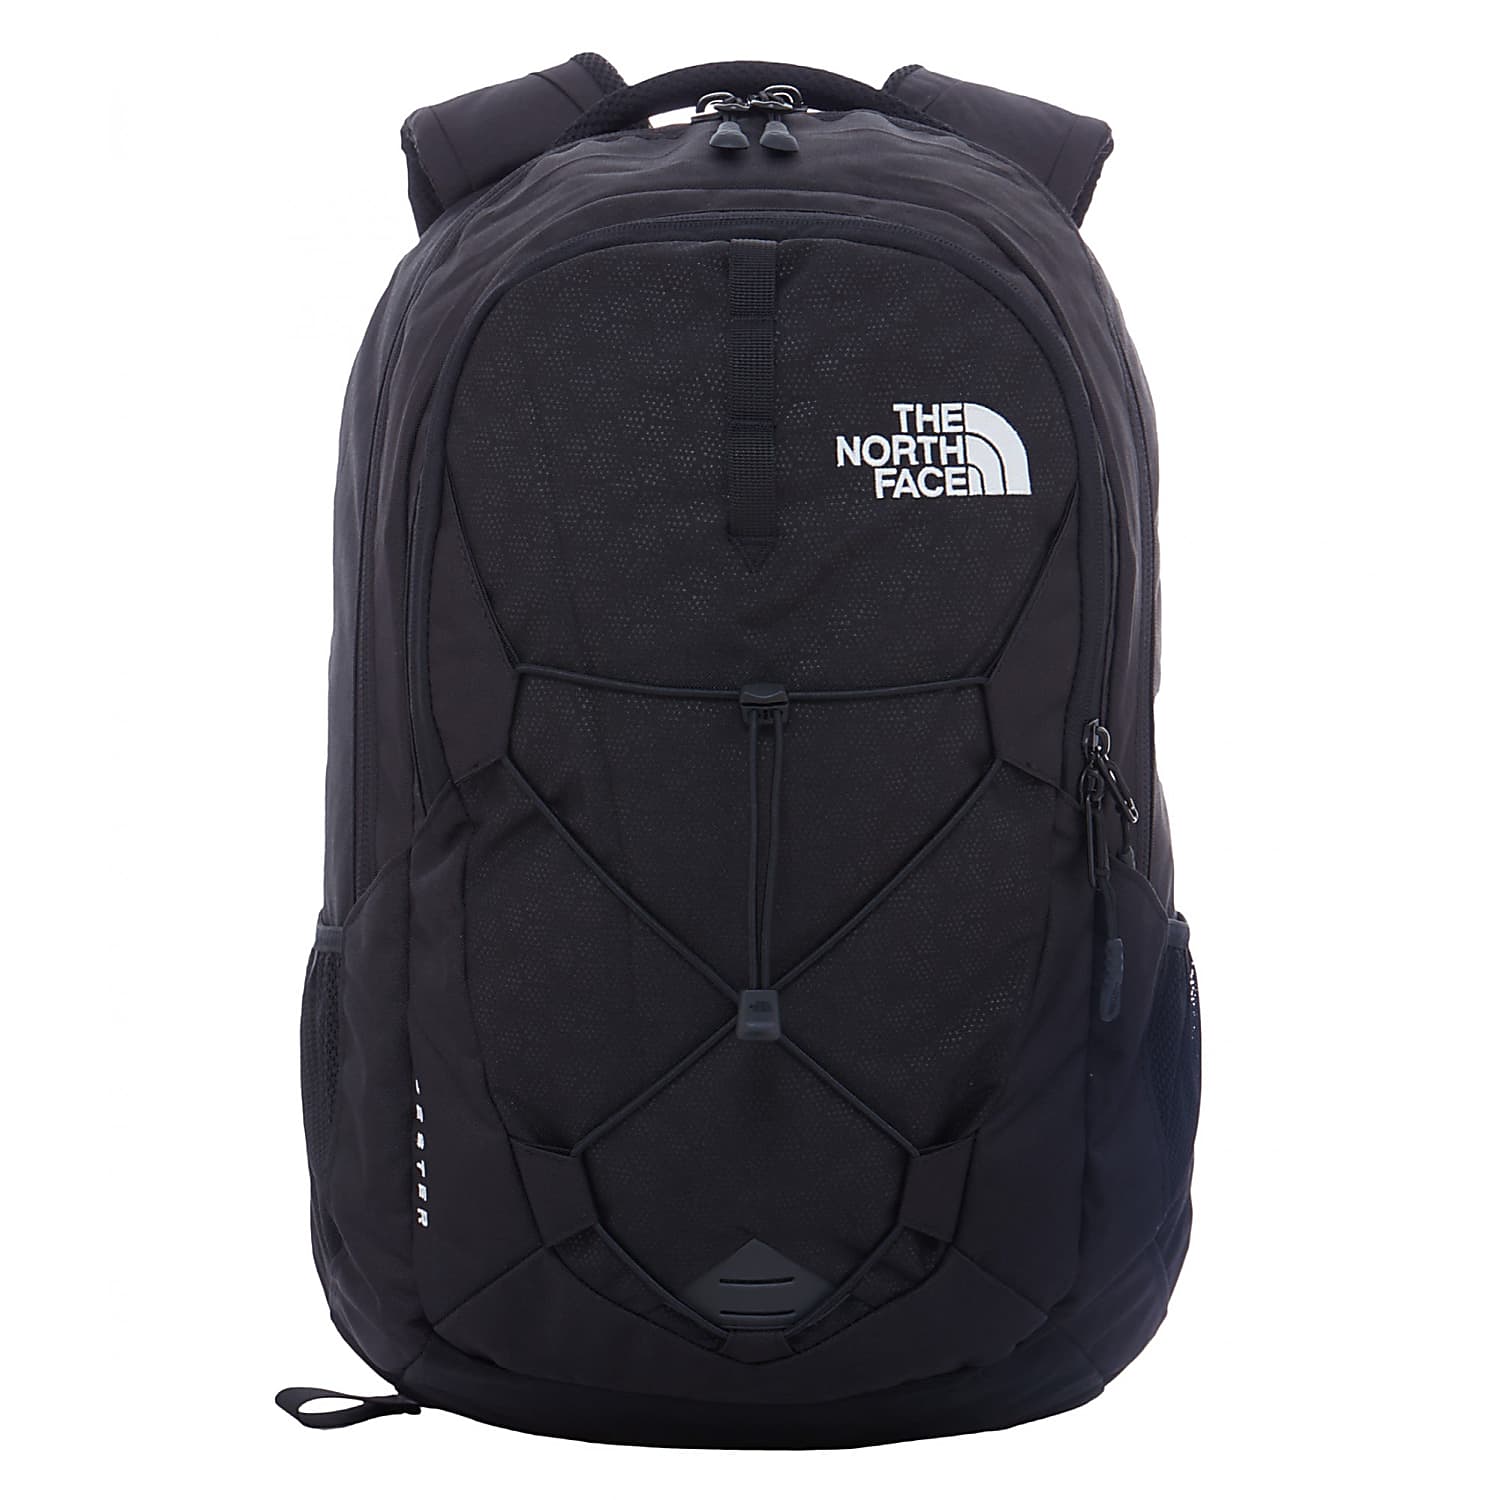 The North Face JESTER, TNF Black - Season 2018 - Fast and cheap 